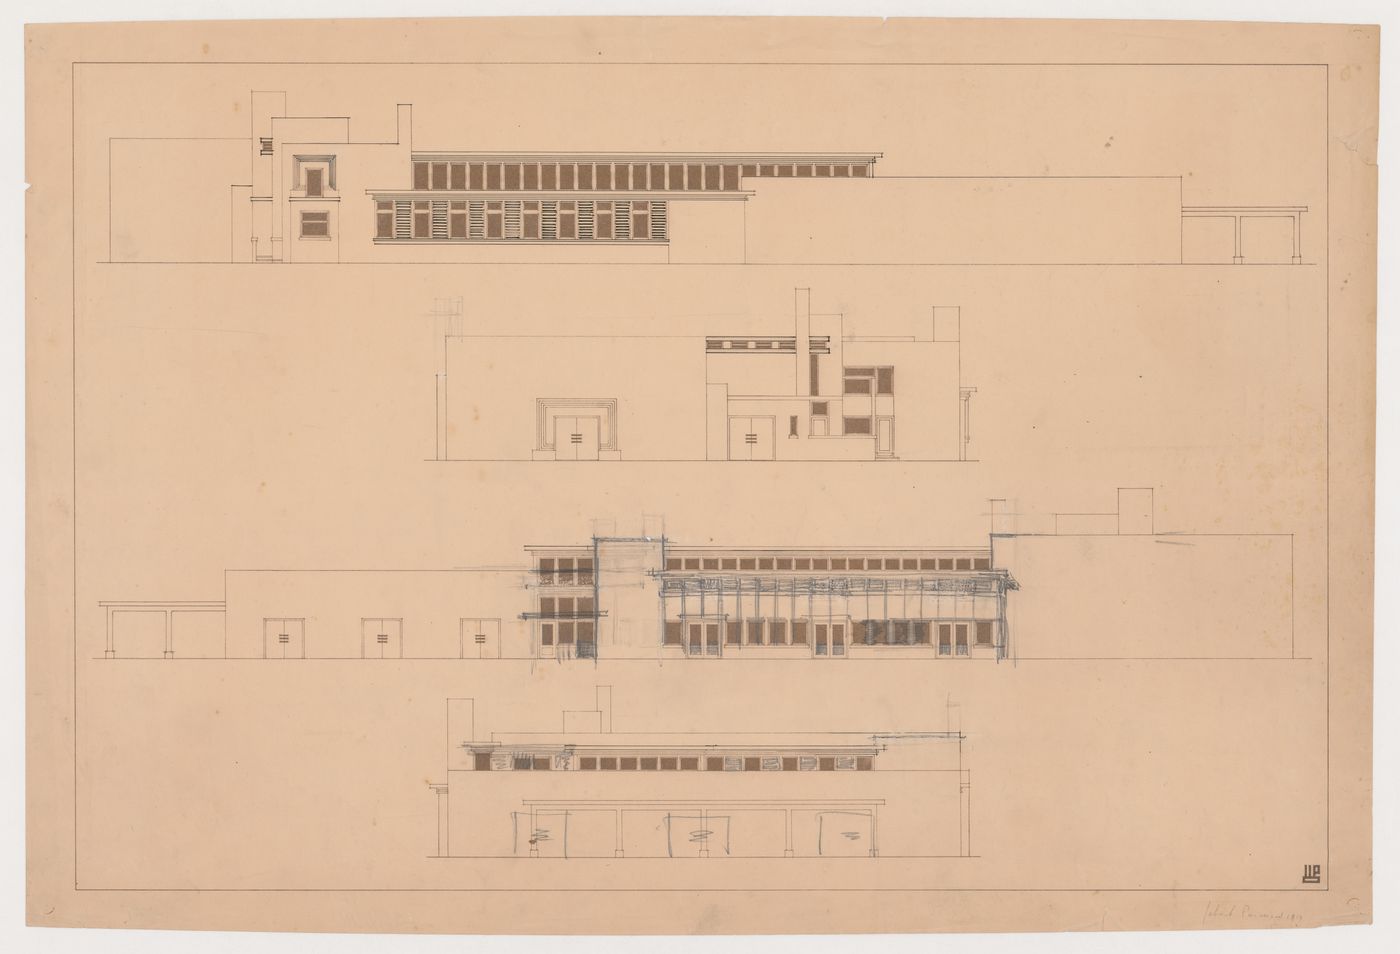 Elevations for a winery, Purmerend, Netherlands